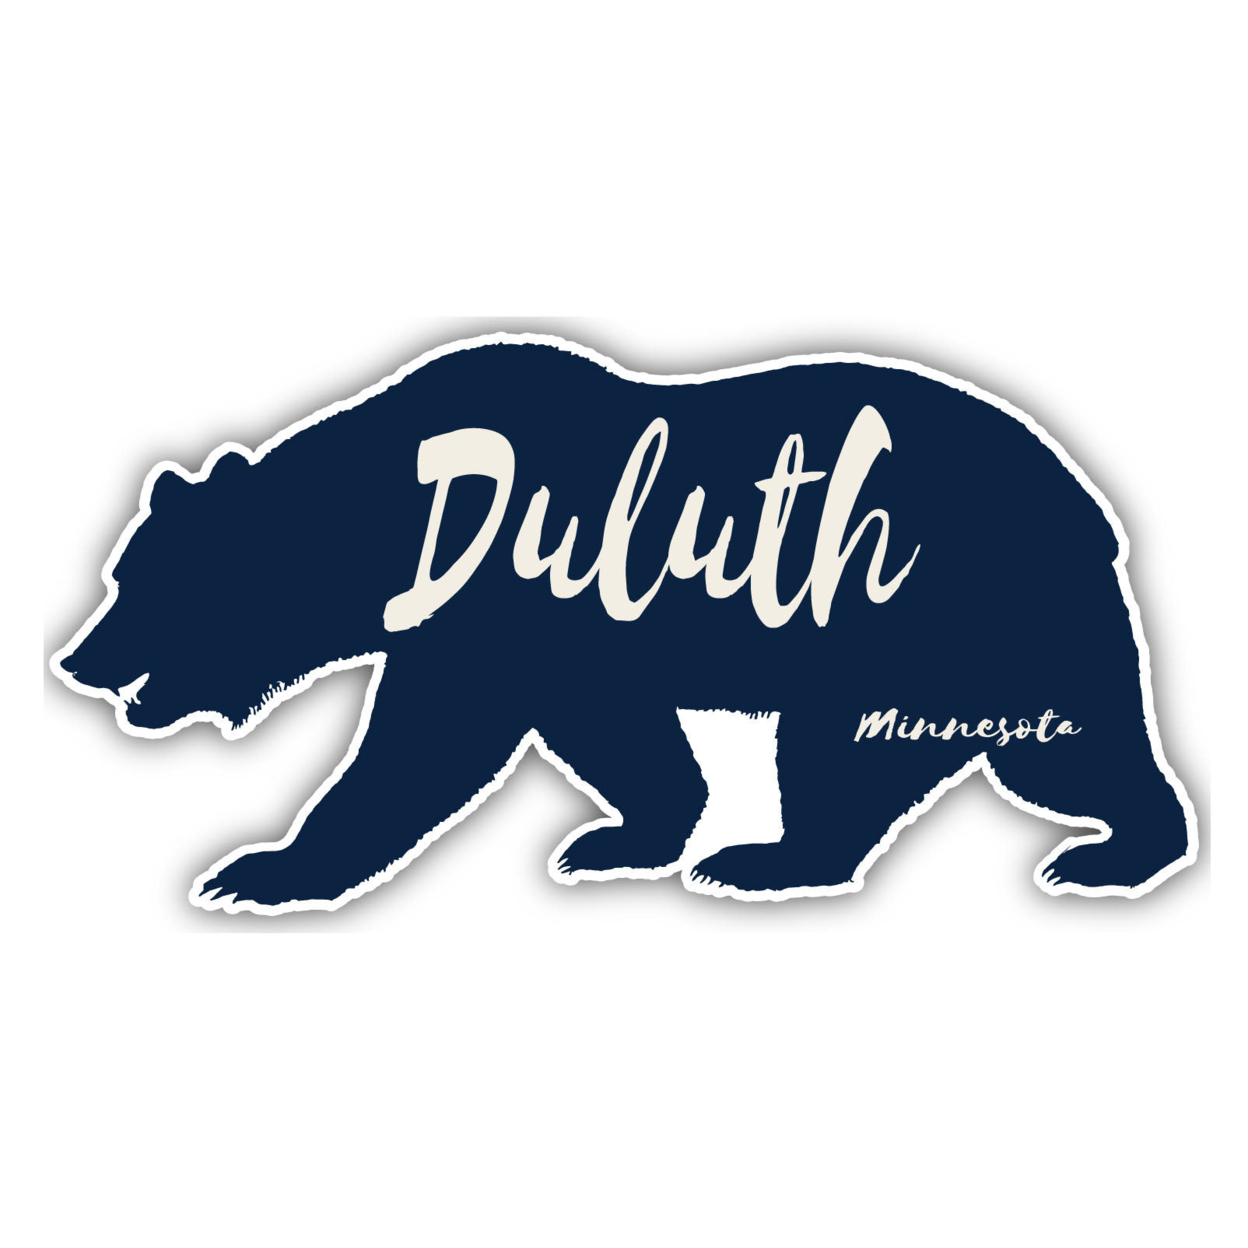 Duluth Minnesota Souvenir Decorative Stickers (Choose Theme And Size) - 4-Pack, 8-Inch, Adventures Awaits